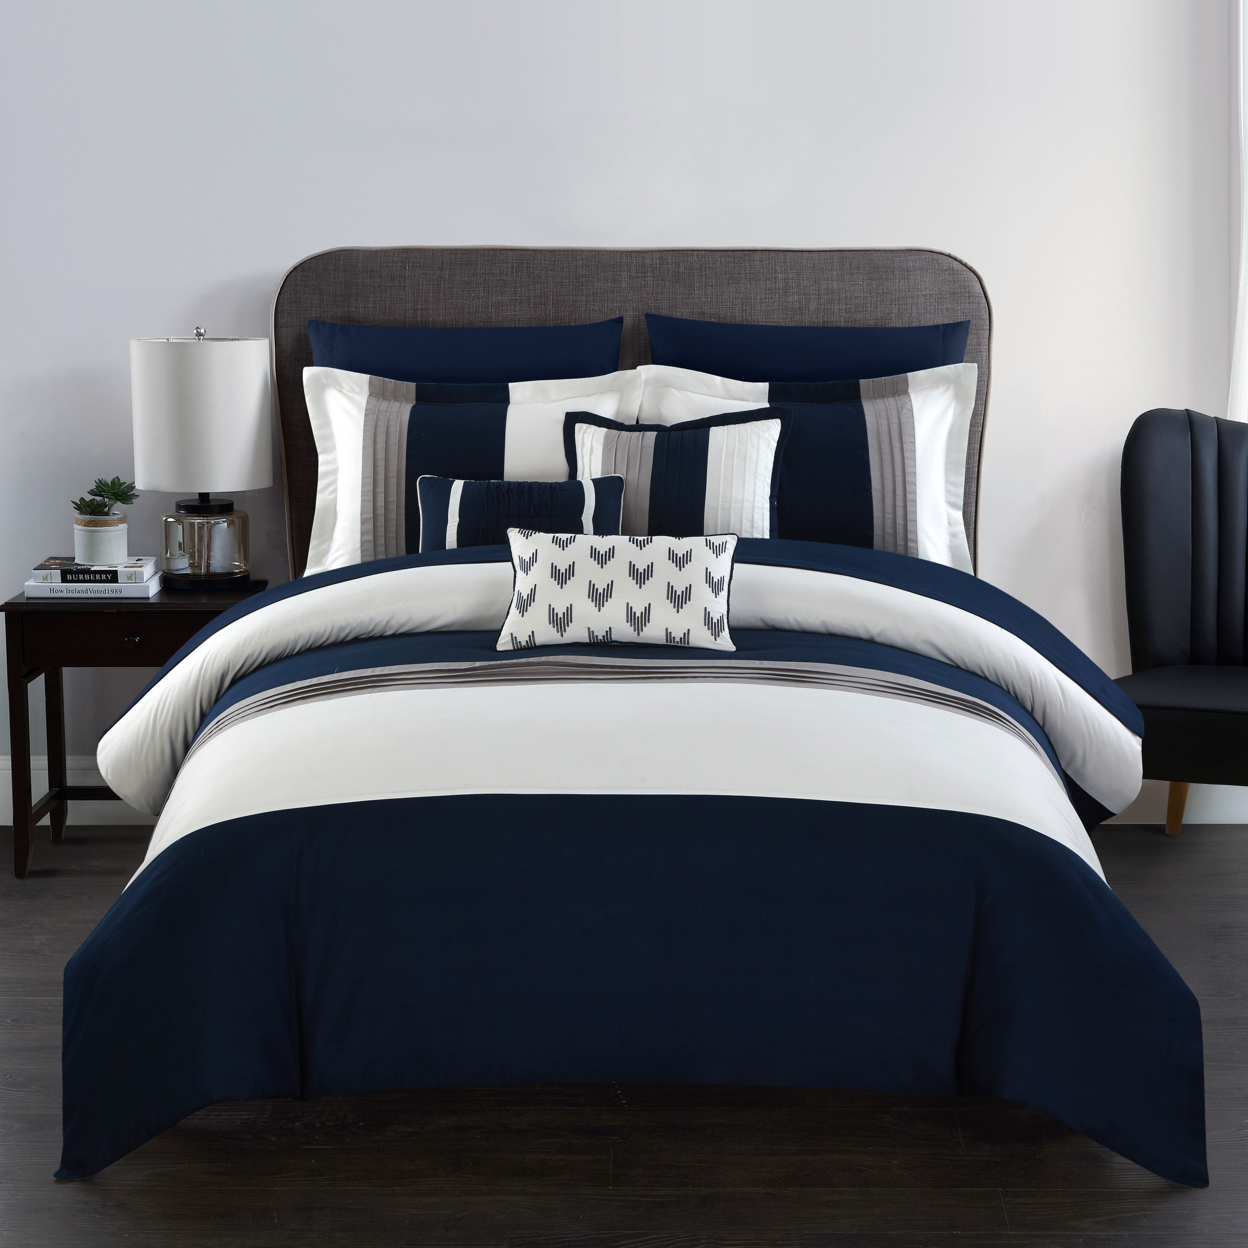 Rashi 10 Or 8 Piece Color Block Bed In A Bag Bedding And Comforter Set - Navy, Queen